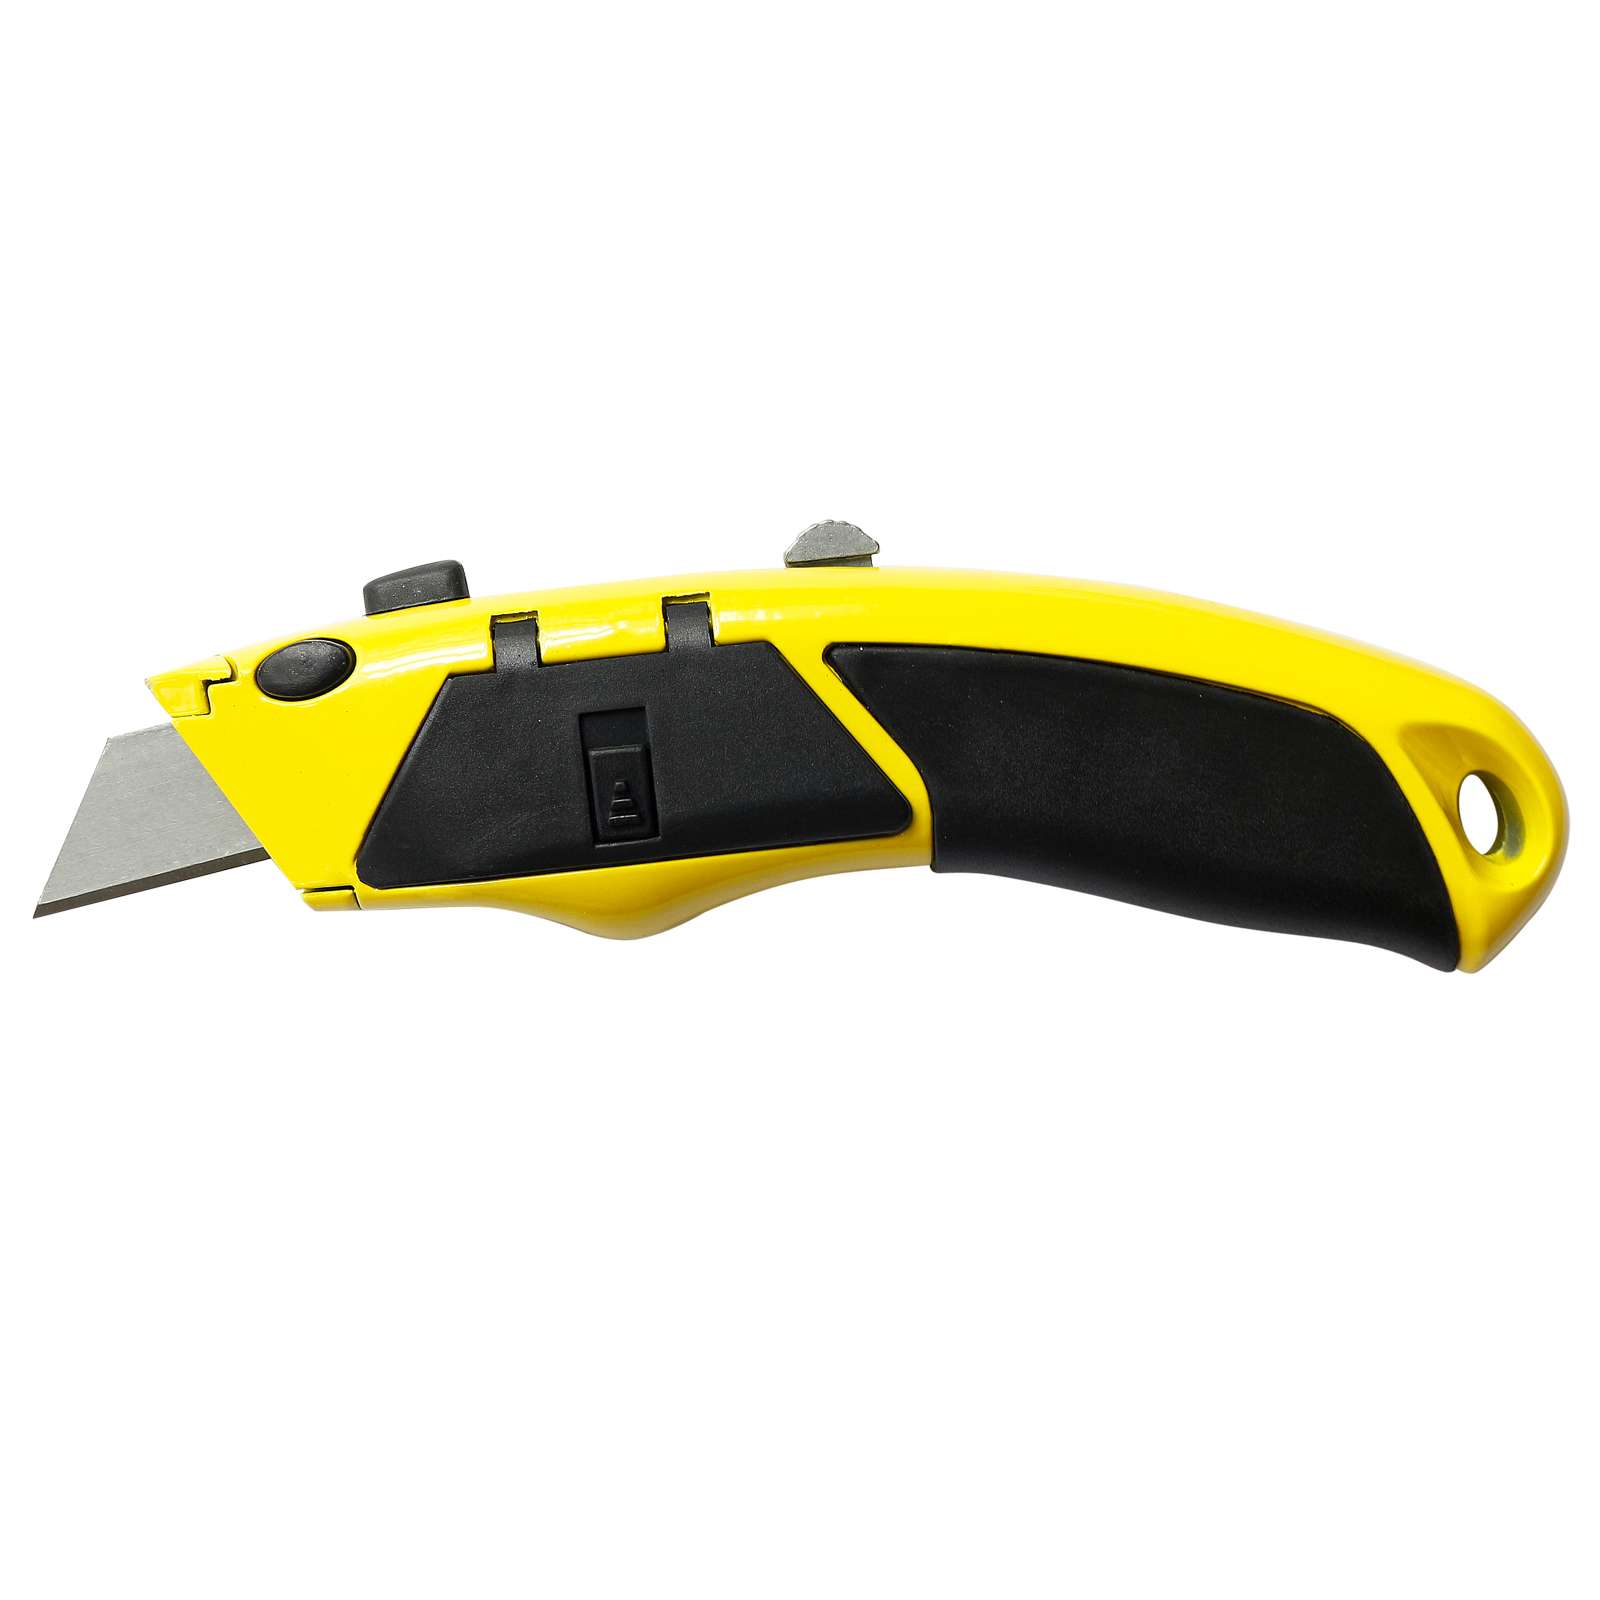 Heavy Duty Utility Knife with Auto Reload 8 Blades - 1